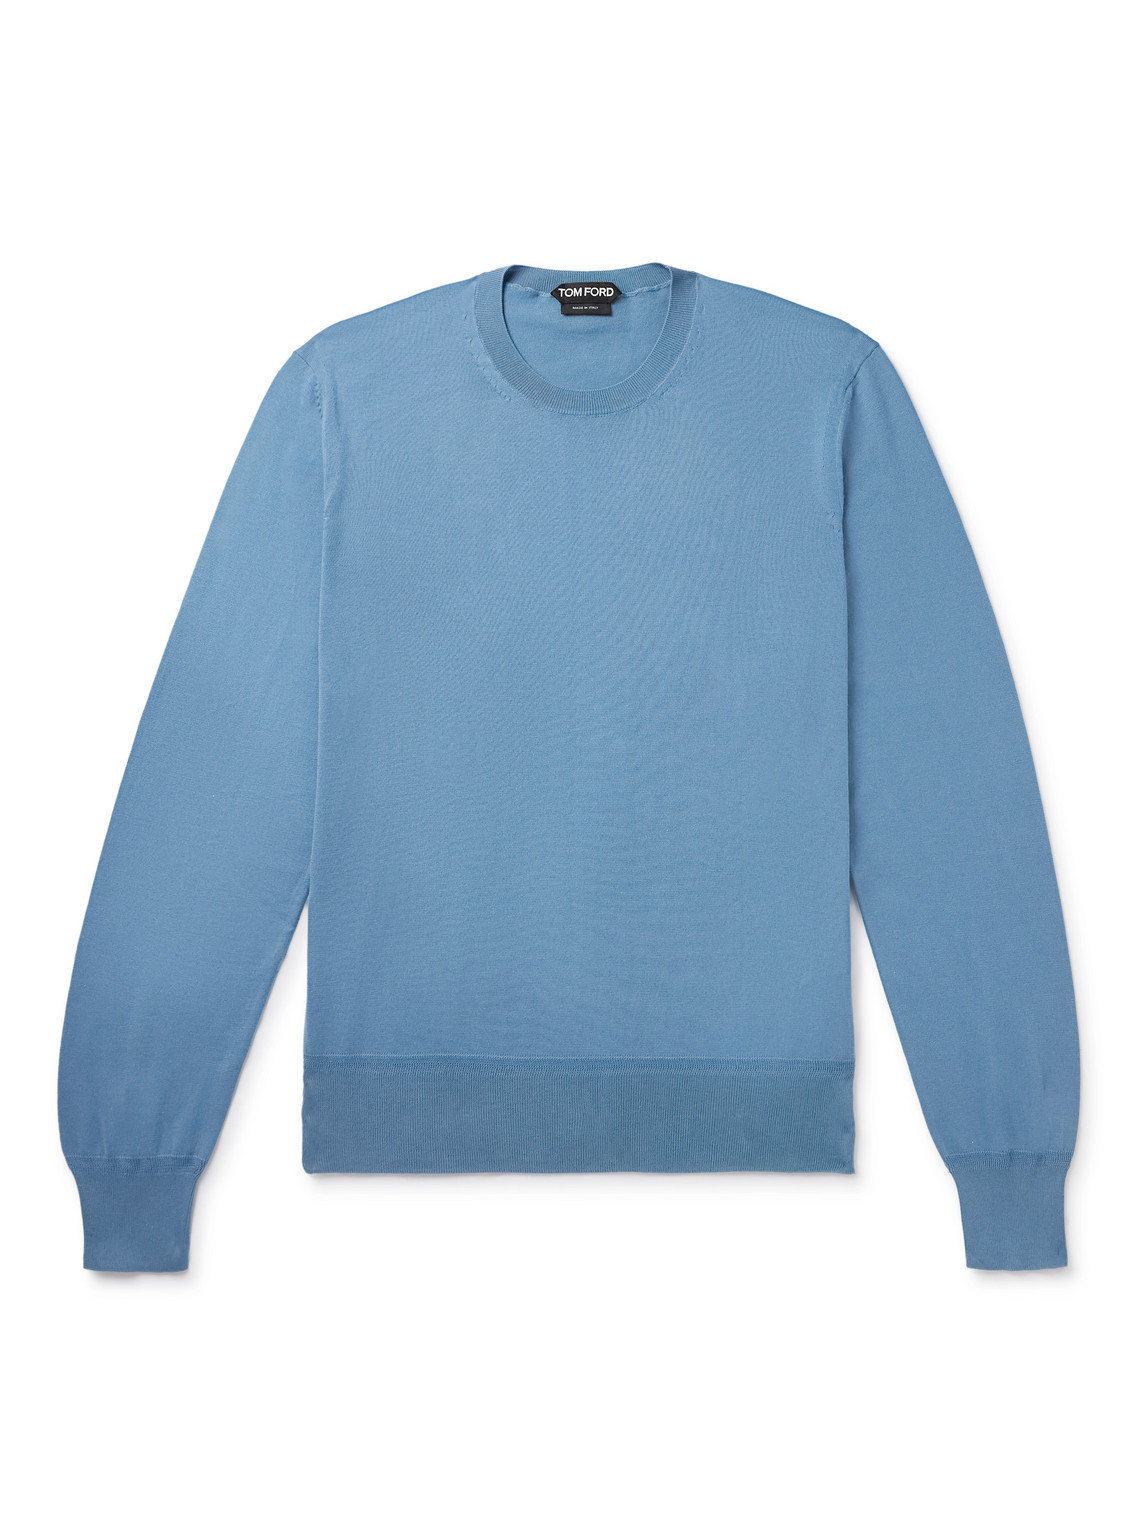 Tom Ford Slim-fit Sea Island Cotton Sweater In Blue